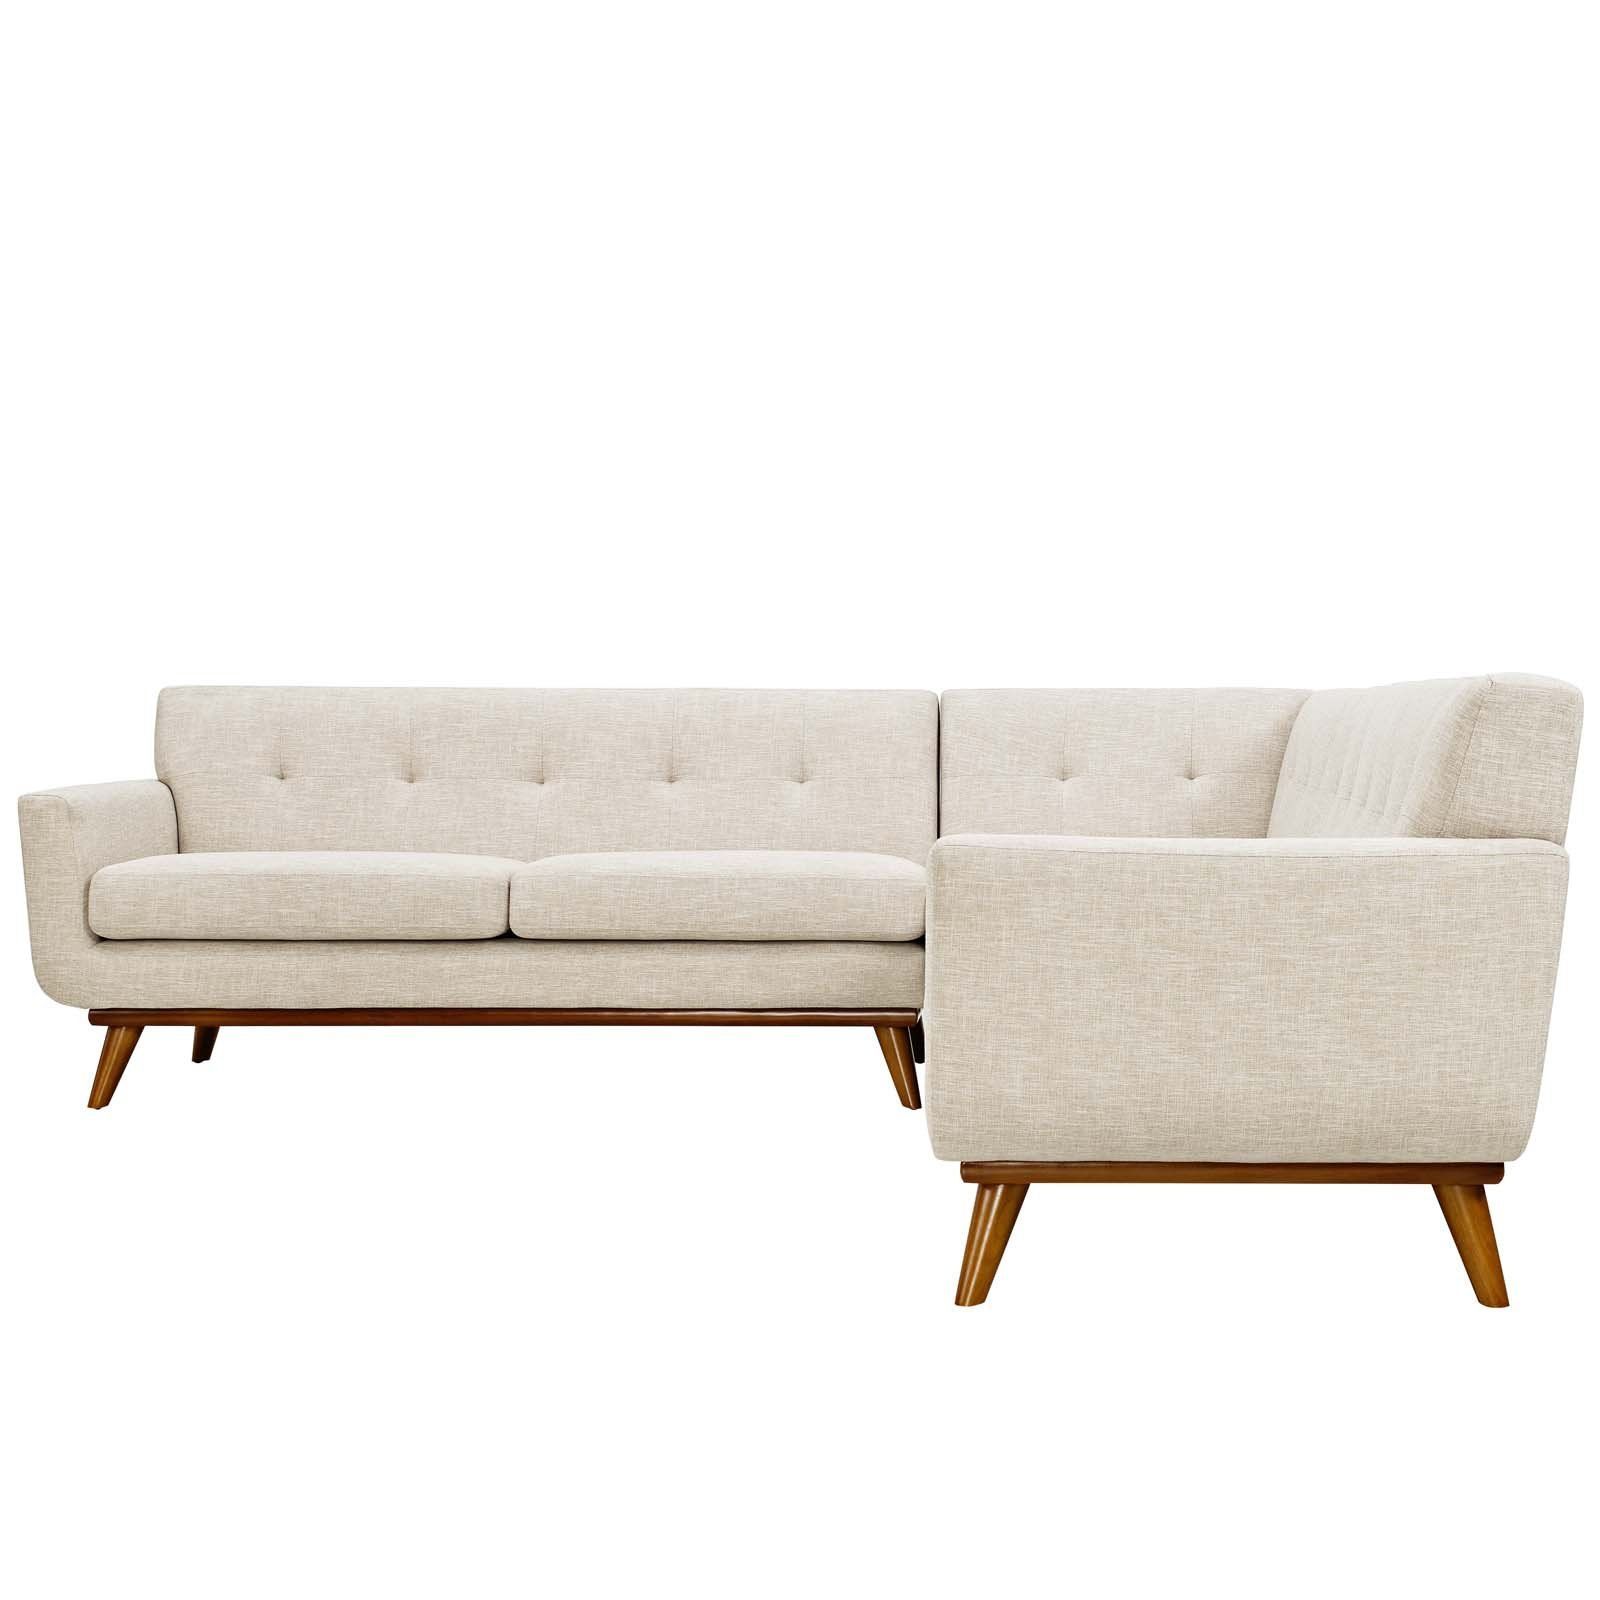 Engage L Shaped Sectional Sofa In Beige | Sectional Sofa Beige, Fabric Throughout Beige L Shaped Sectional Sofas (Gallery 20 of 20)